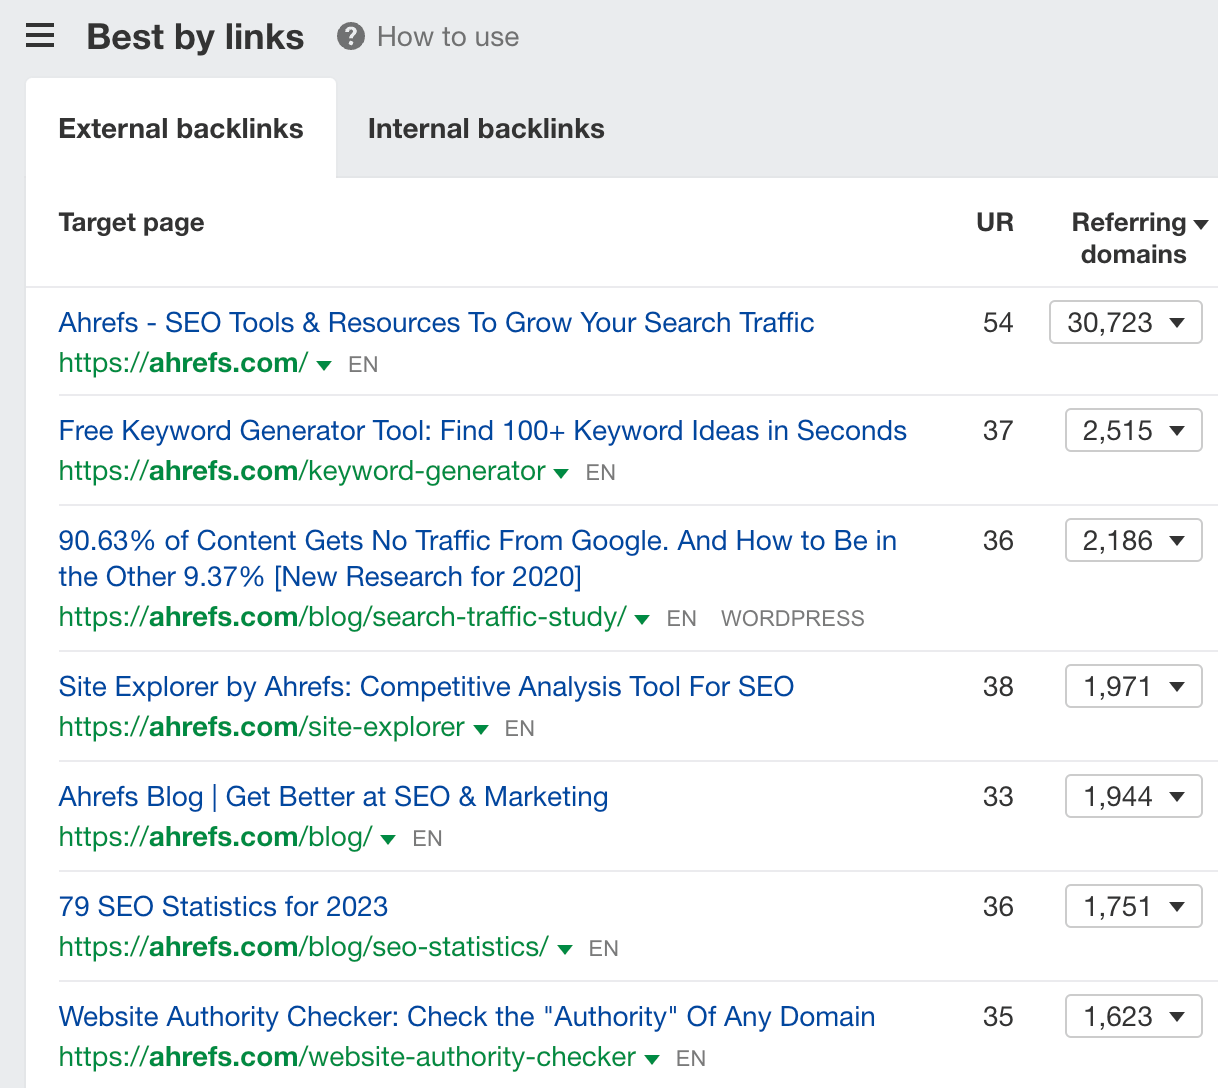 Best by links shows you pages on competing sites with the most links